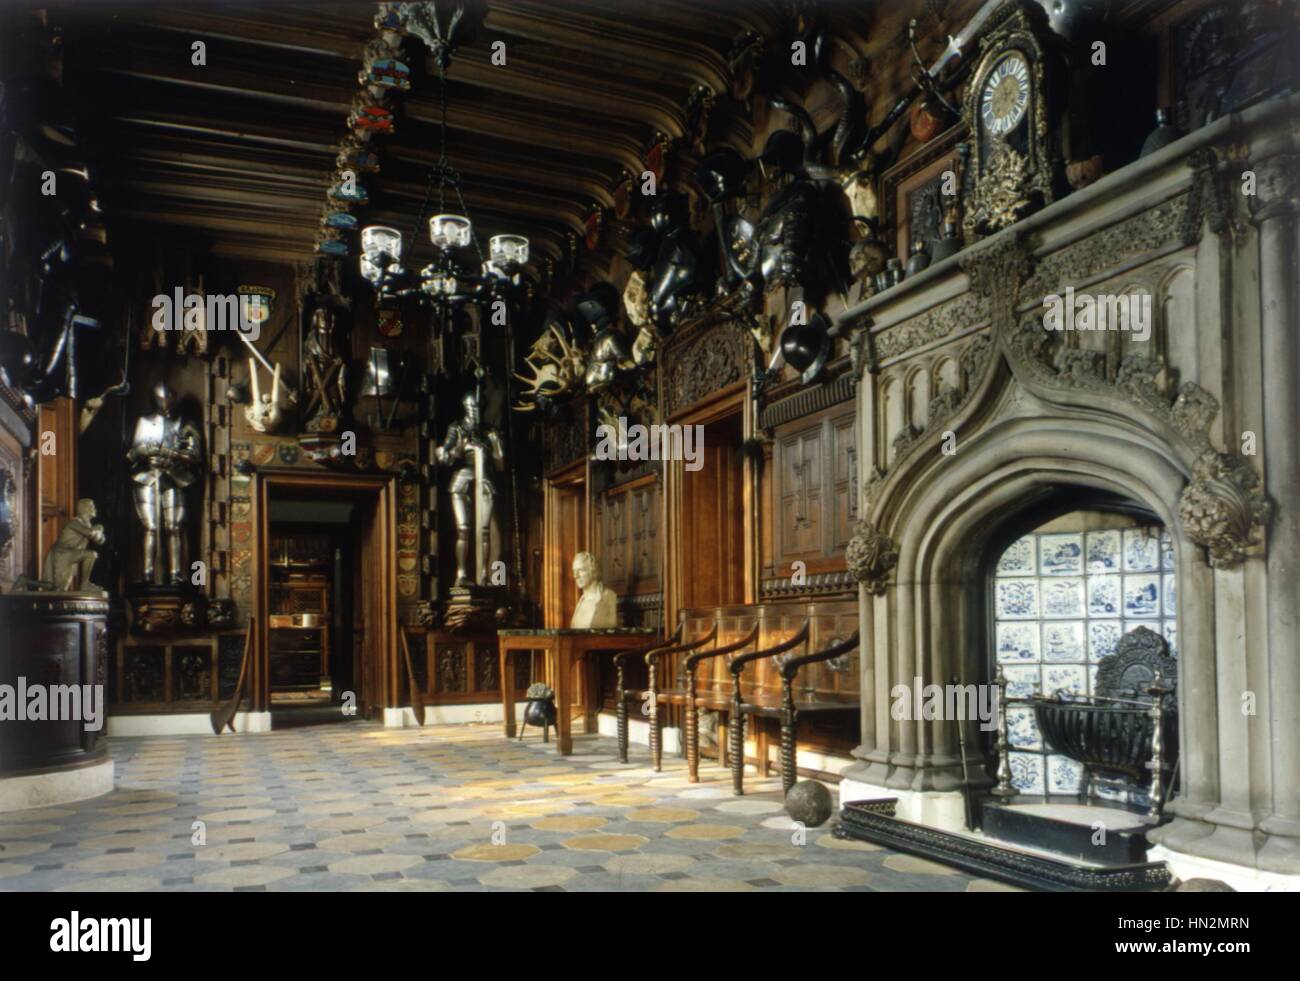 Arms room of Sir Walter Scott's house in Abbotsford, Scotland 20th century England Stock Photo